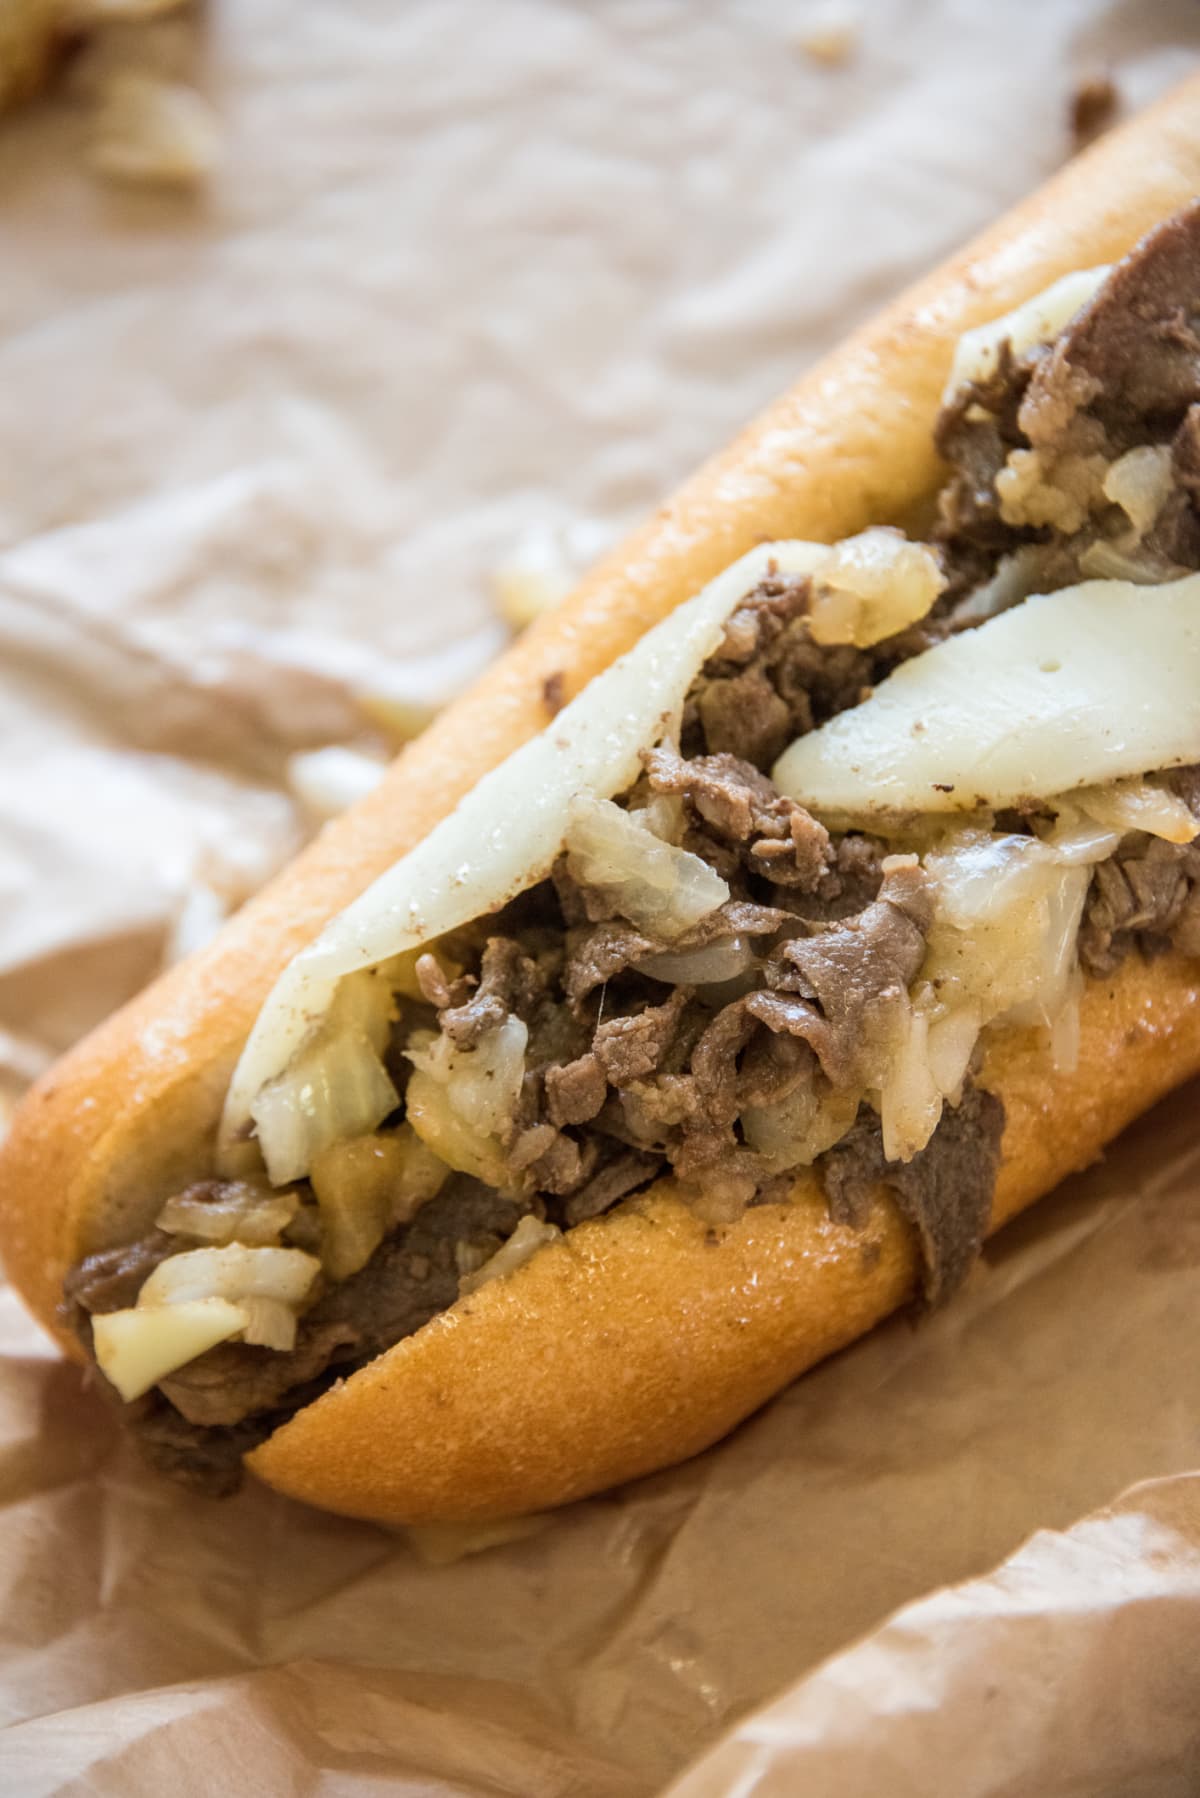 A Philly cheesesteak on hoagie bread